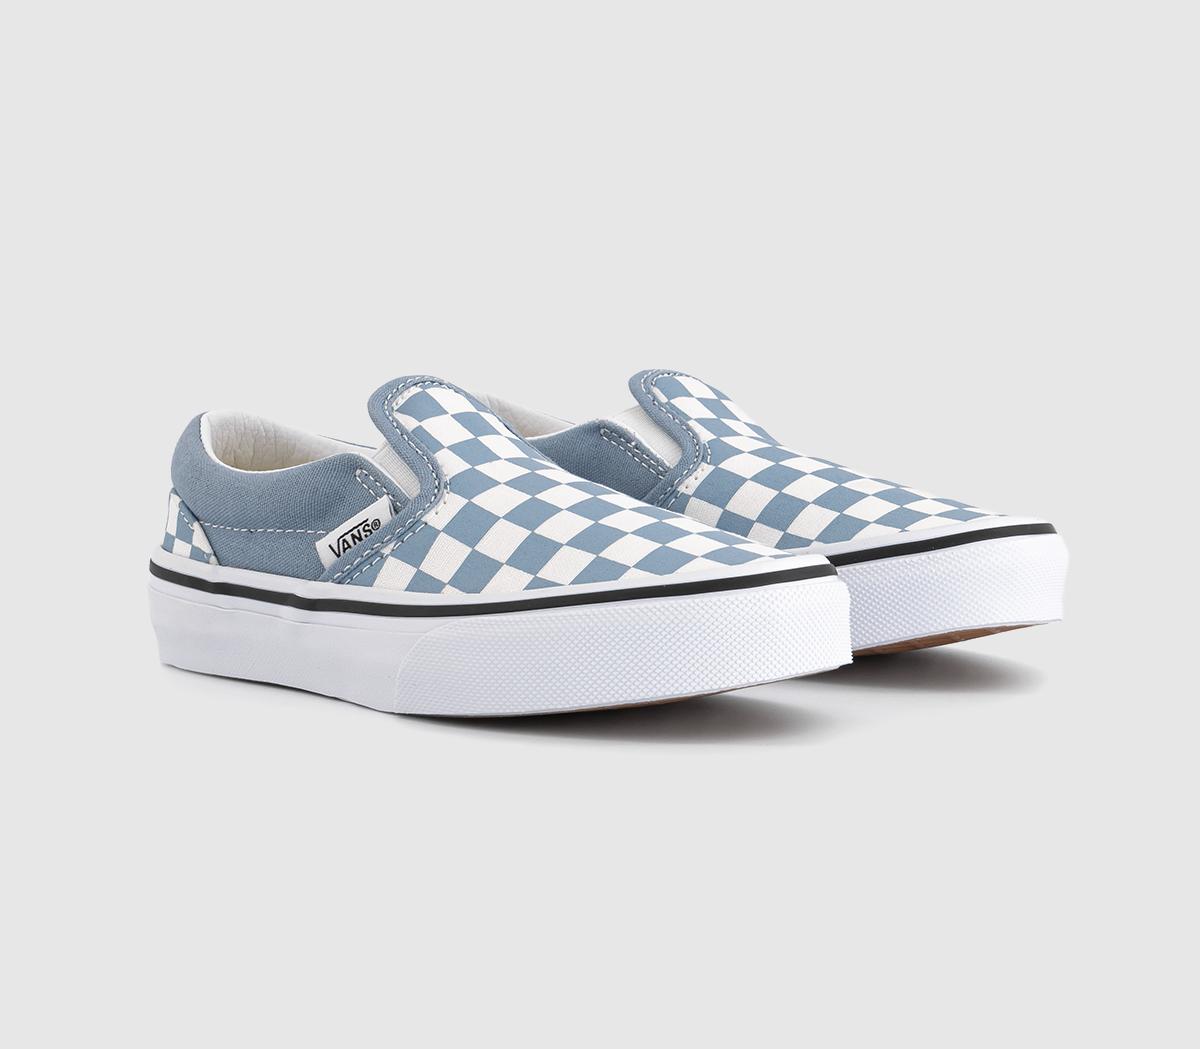 Vans Classic Slip On Kids Color Theory Checkerboard Dusty Blue, 11 Youth